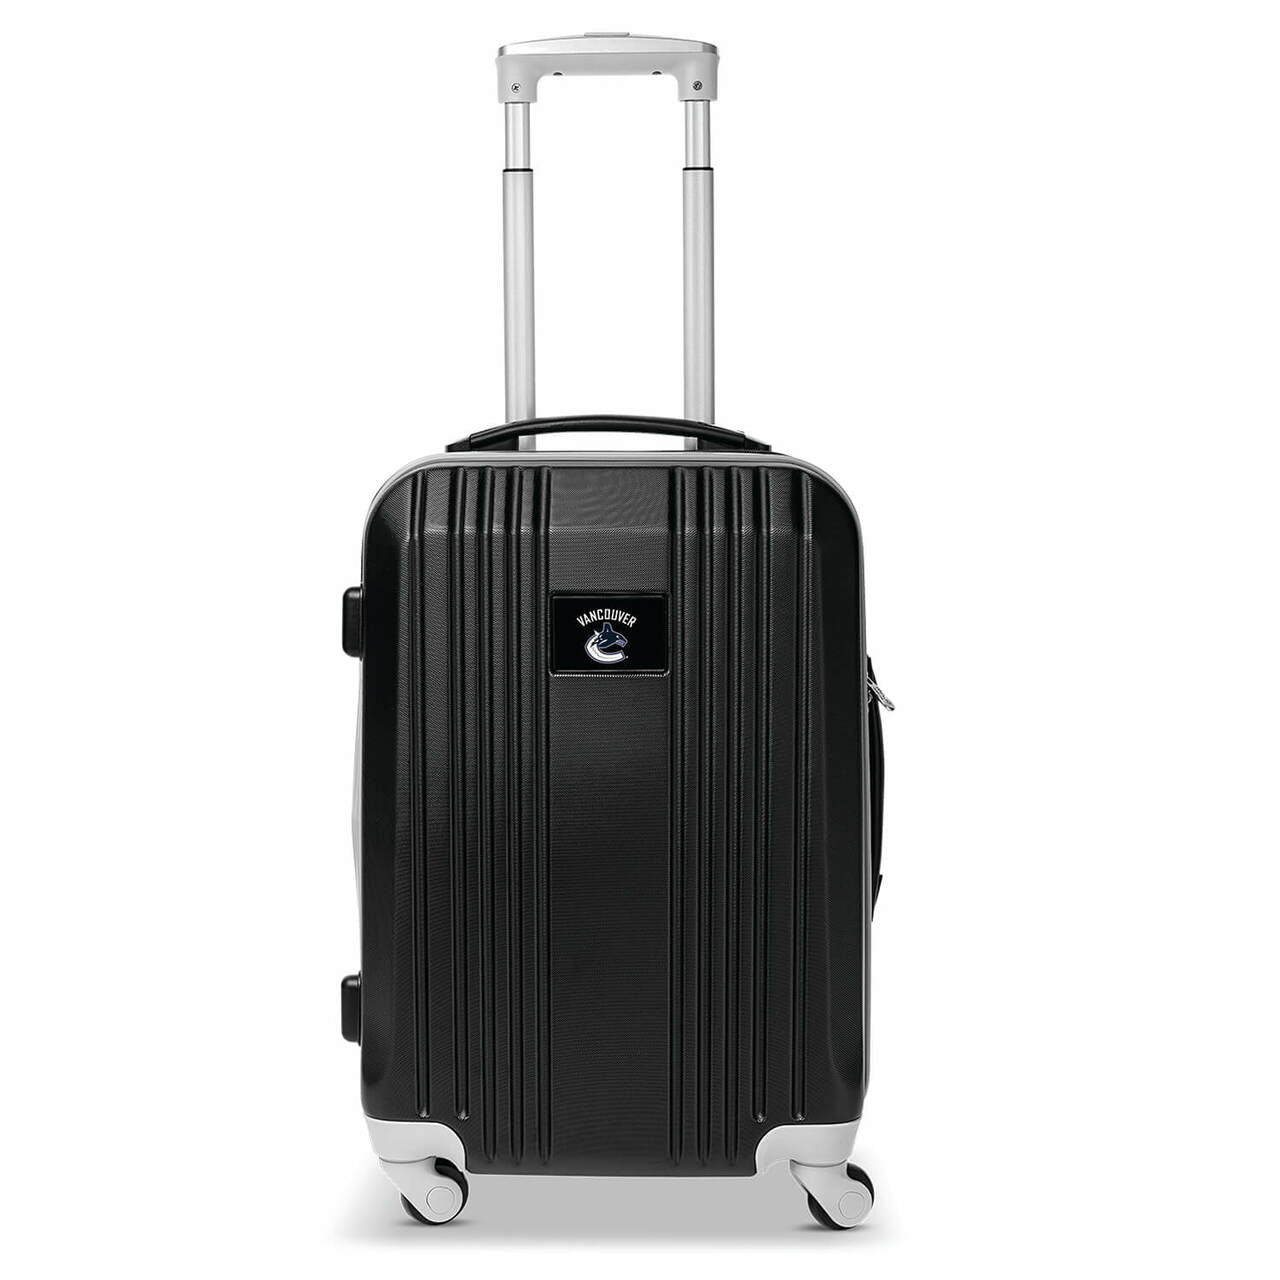 Canucks Carry On Spinner Luggage | Vancouver Canucks Hardcase Two-Tone Luggage Carry-on Spinner in Gray